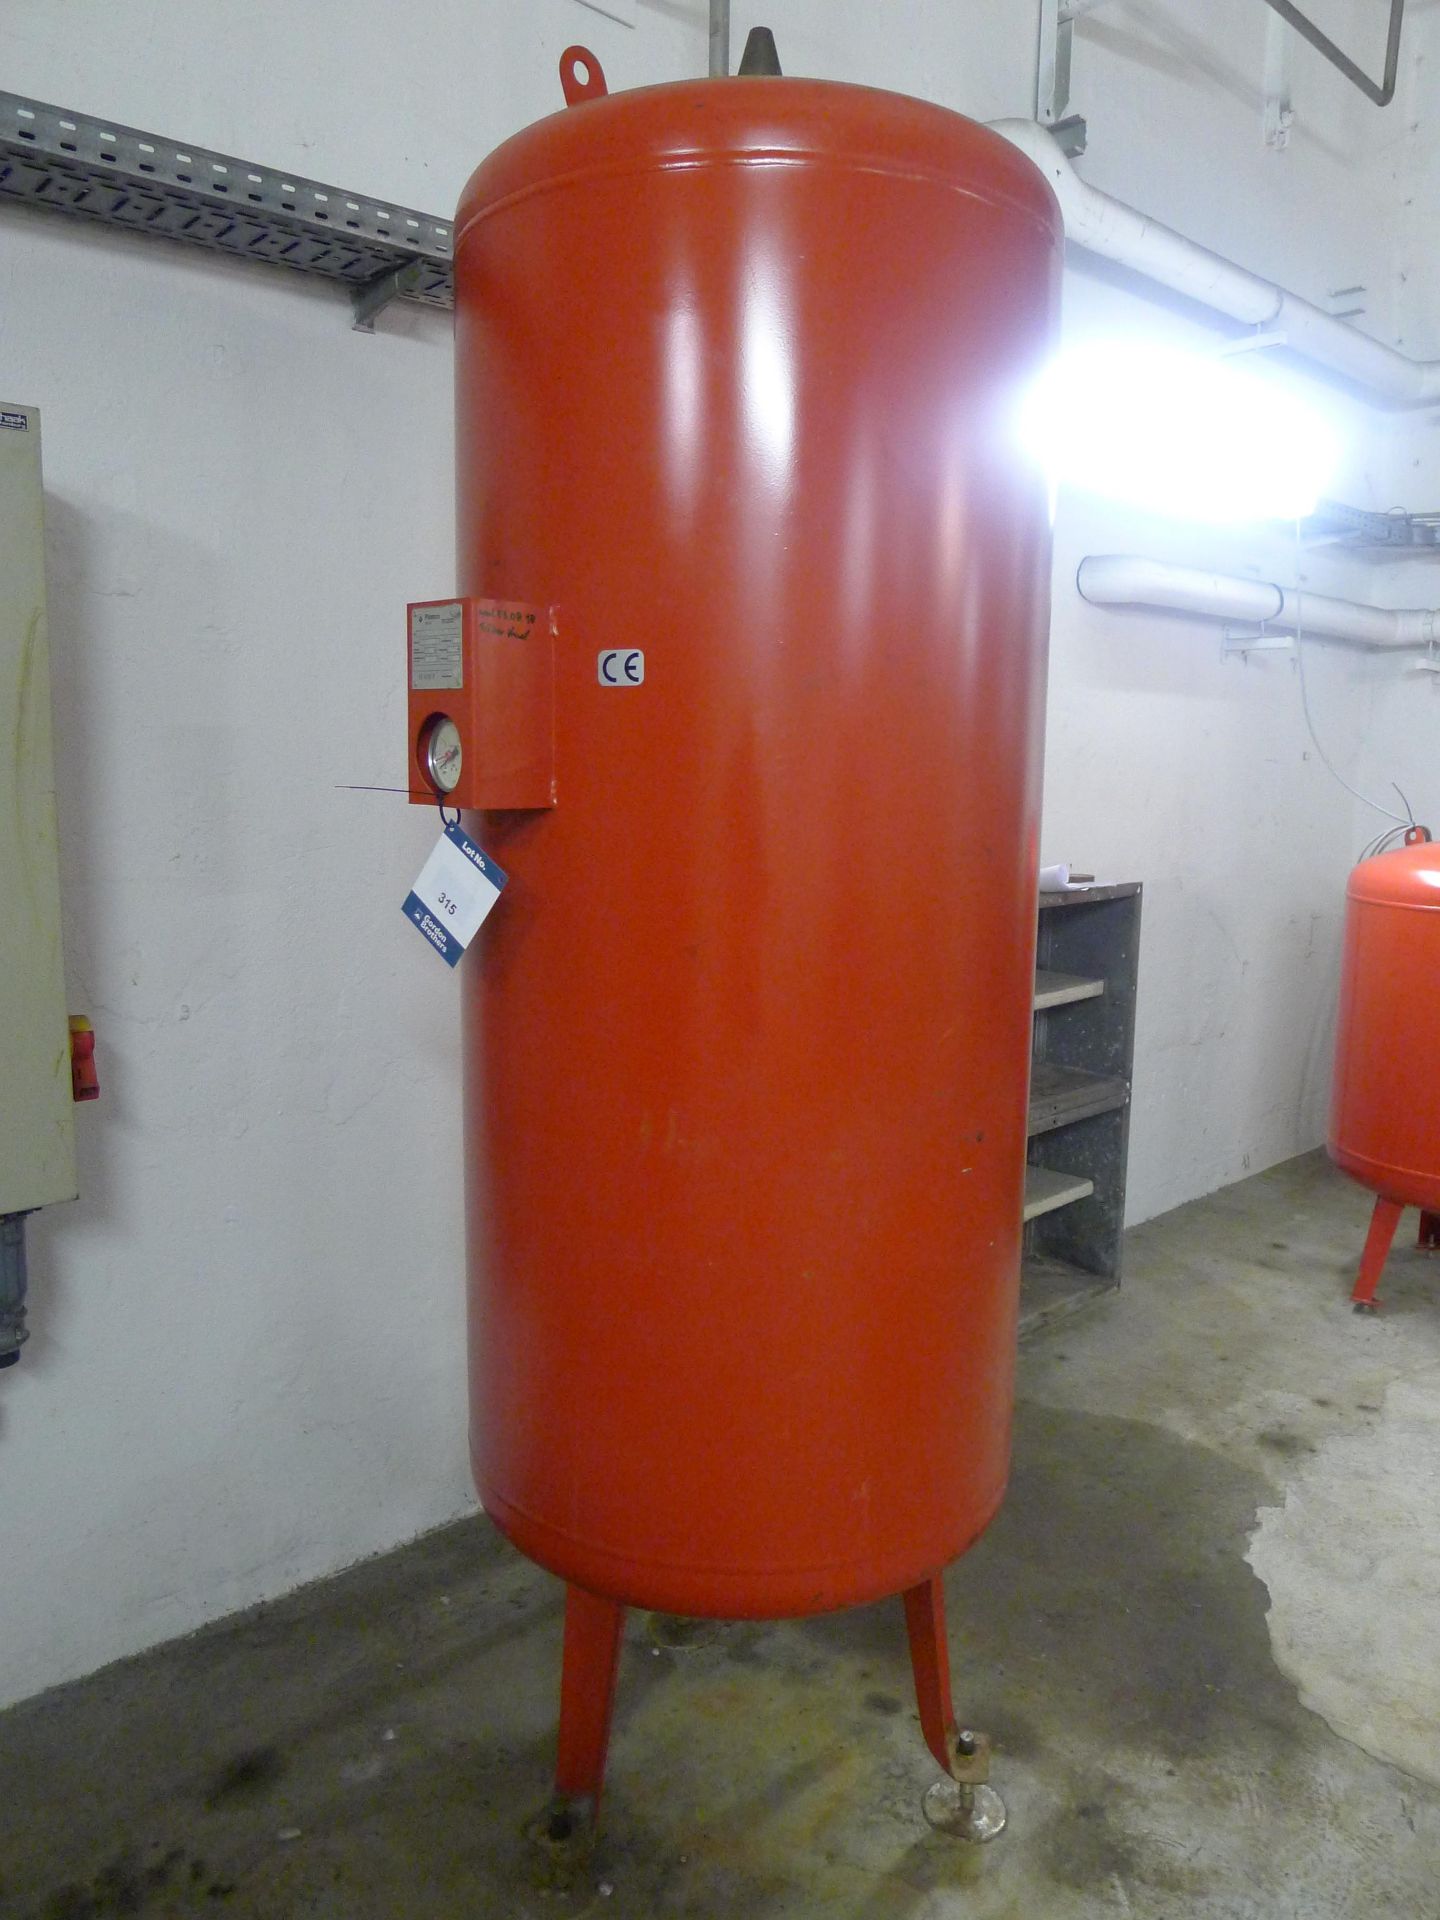 Flamco Flexcon M, 800 Ltr Capacity Pressure Vessel S/N 19355 (Dismantling and Loading Fee: €175)